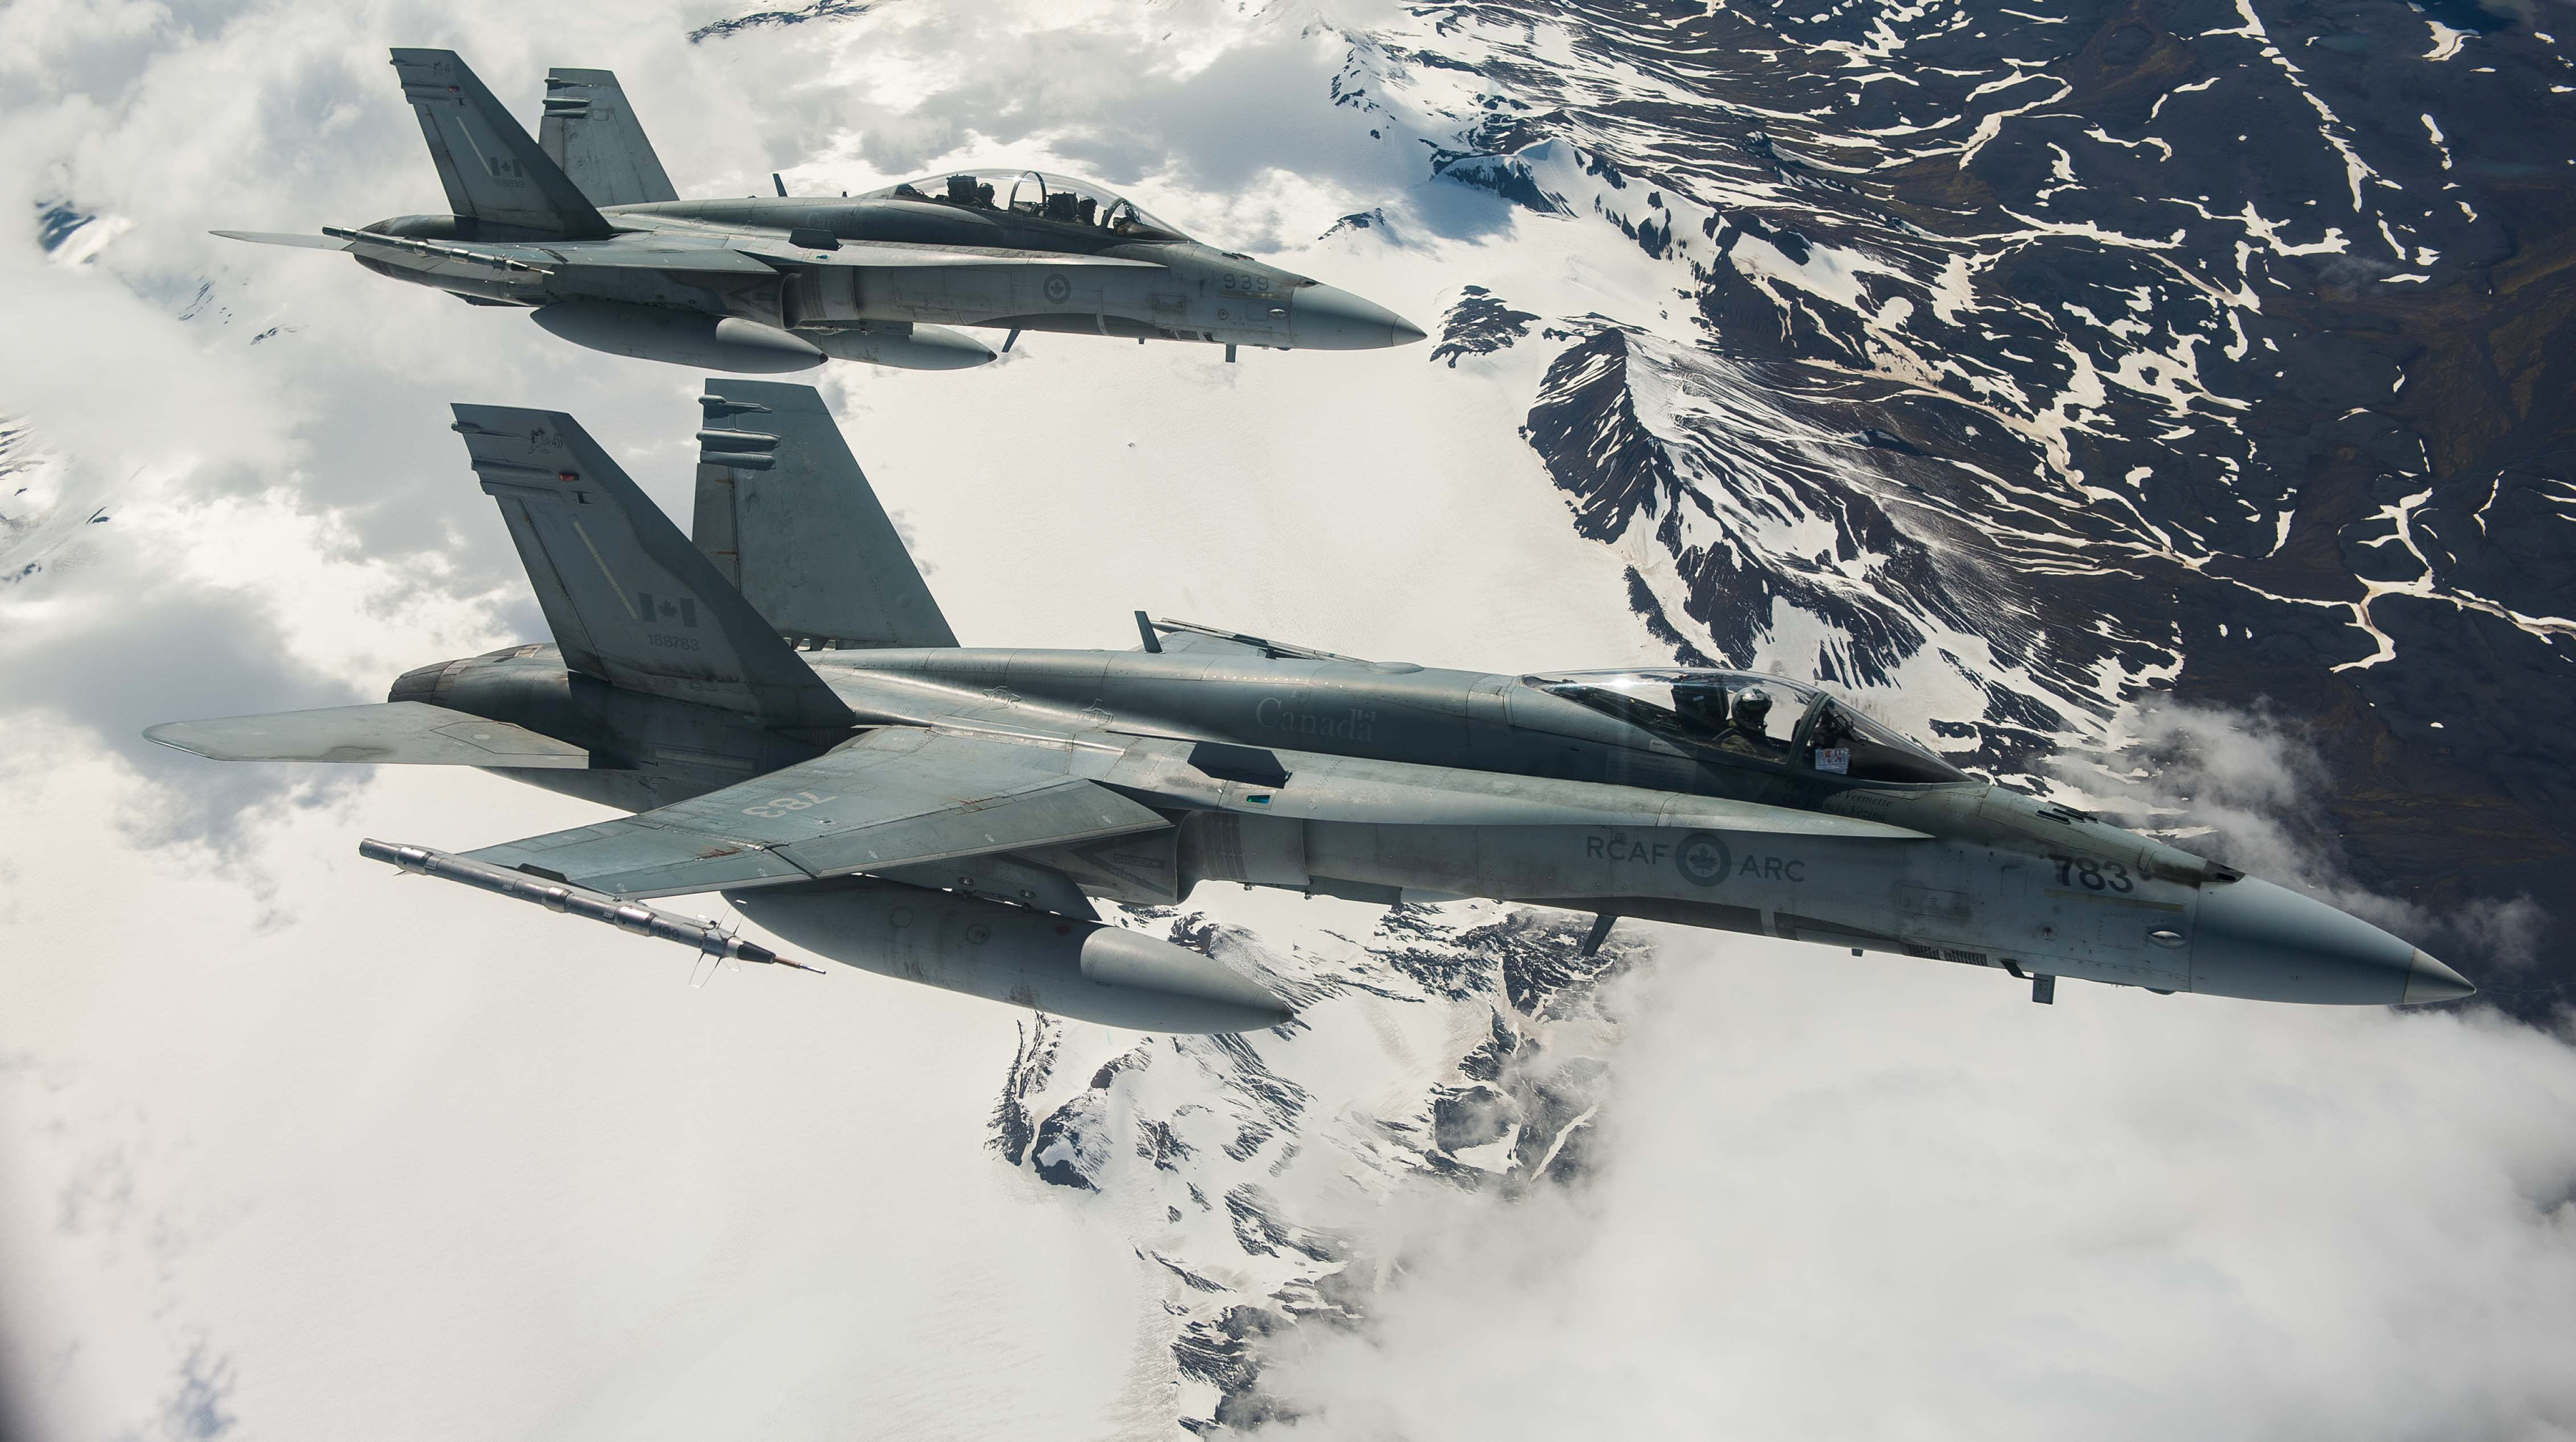 Two Royal Canadian Air Force CF-188 Hornet fighters from 433 Tactical Fighter Squadron fly over Iceland during an Operation REASSURANCE surveillance mission on May 31, 2017.  (Gary Calvé / Courtesy Canadian Armed Forces via Reuters)